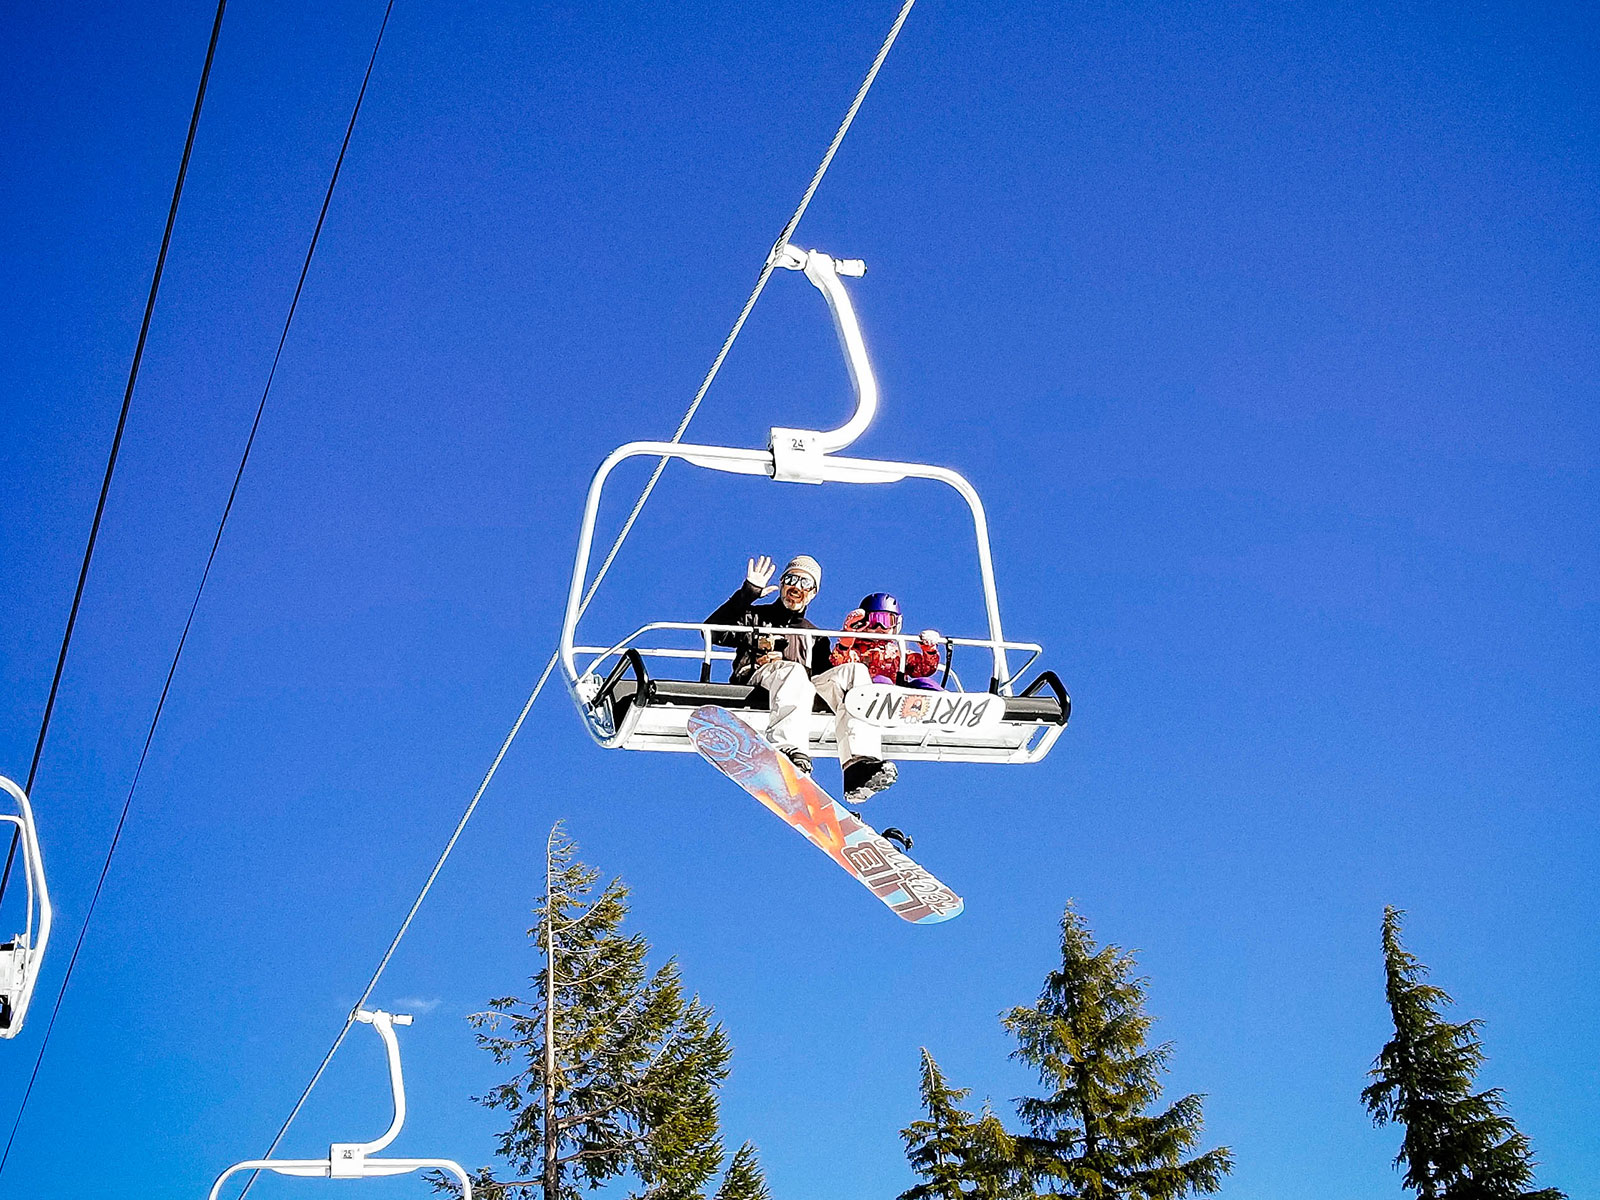 Dad and toddler riding on a chairlift at a ski resort